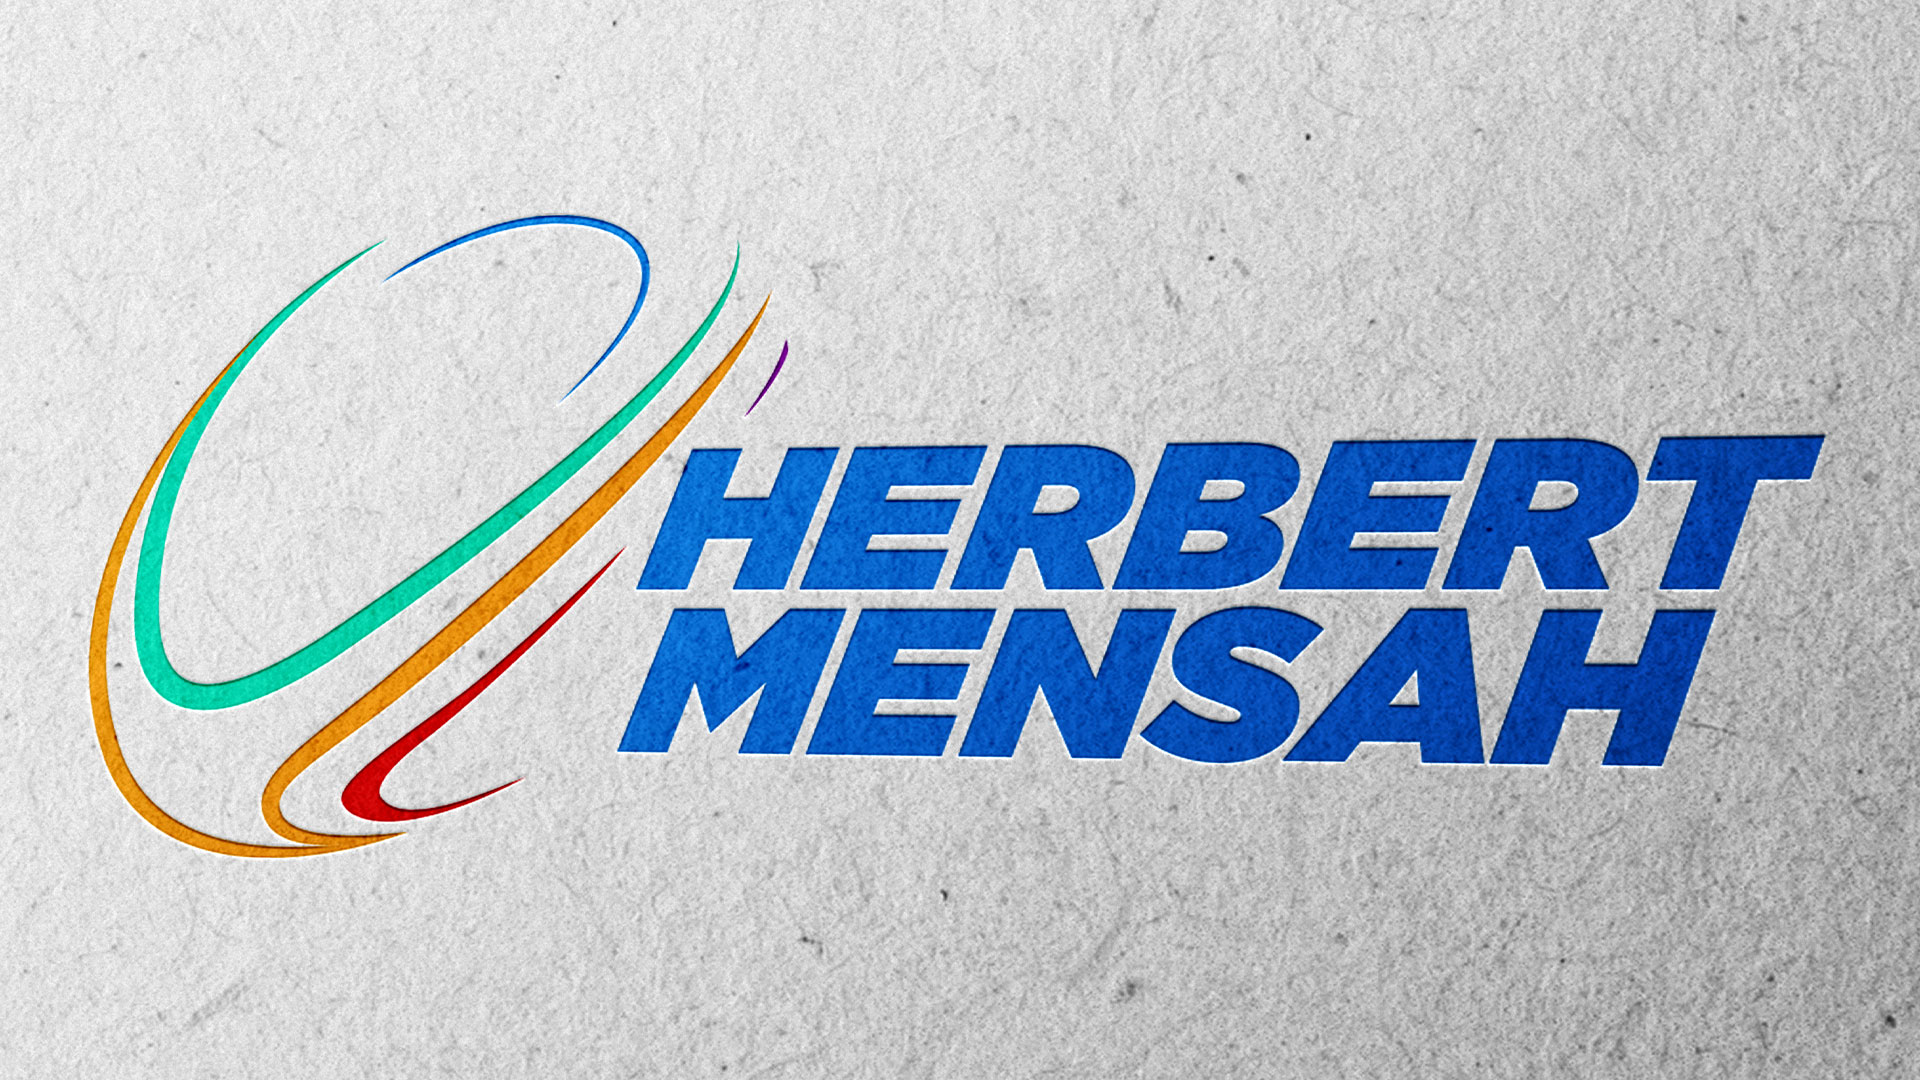 Radio News Release (Soundbite): Africa Rugby Executive Committee member Herbert Mensah announces his candidacy for President of Rugby Africa